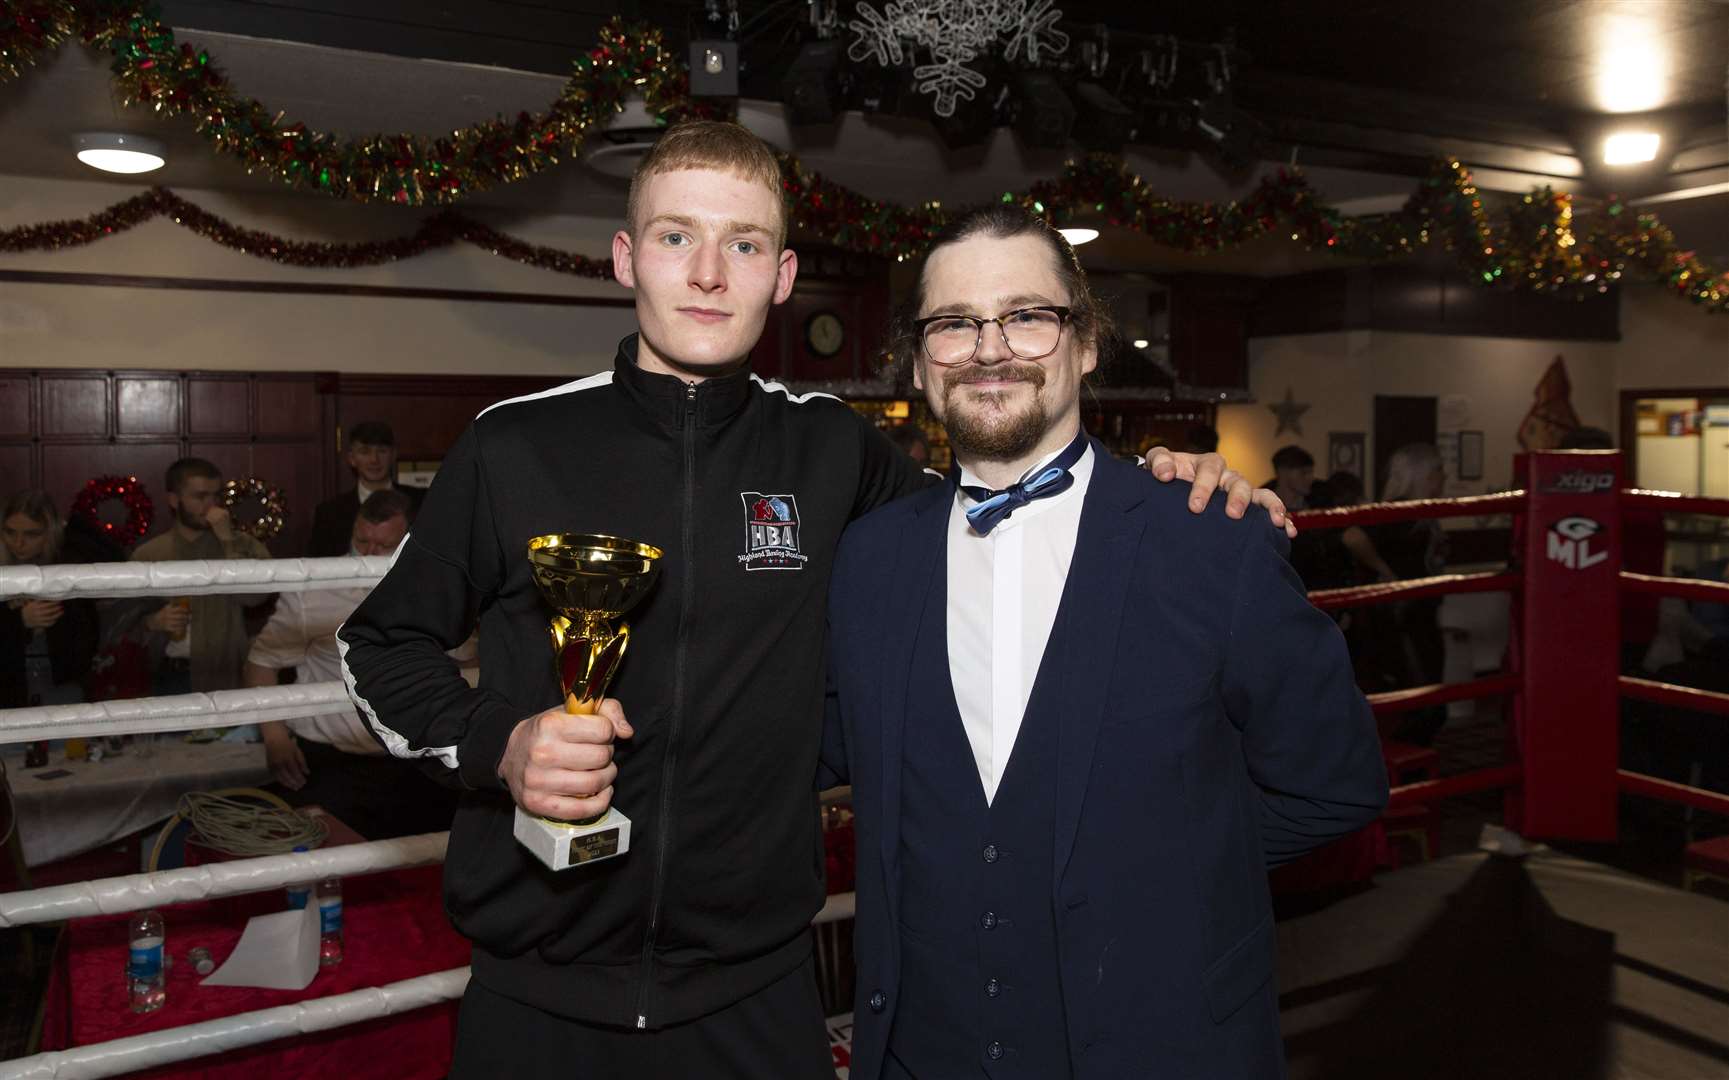 The fight of the night trophy at Highland Boxing Academy's home show in December 2021 was won by Liam Miller, who took a split decision against Jake Love. Picture: David Rothnie